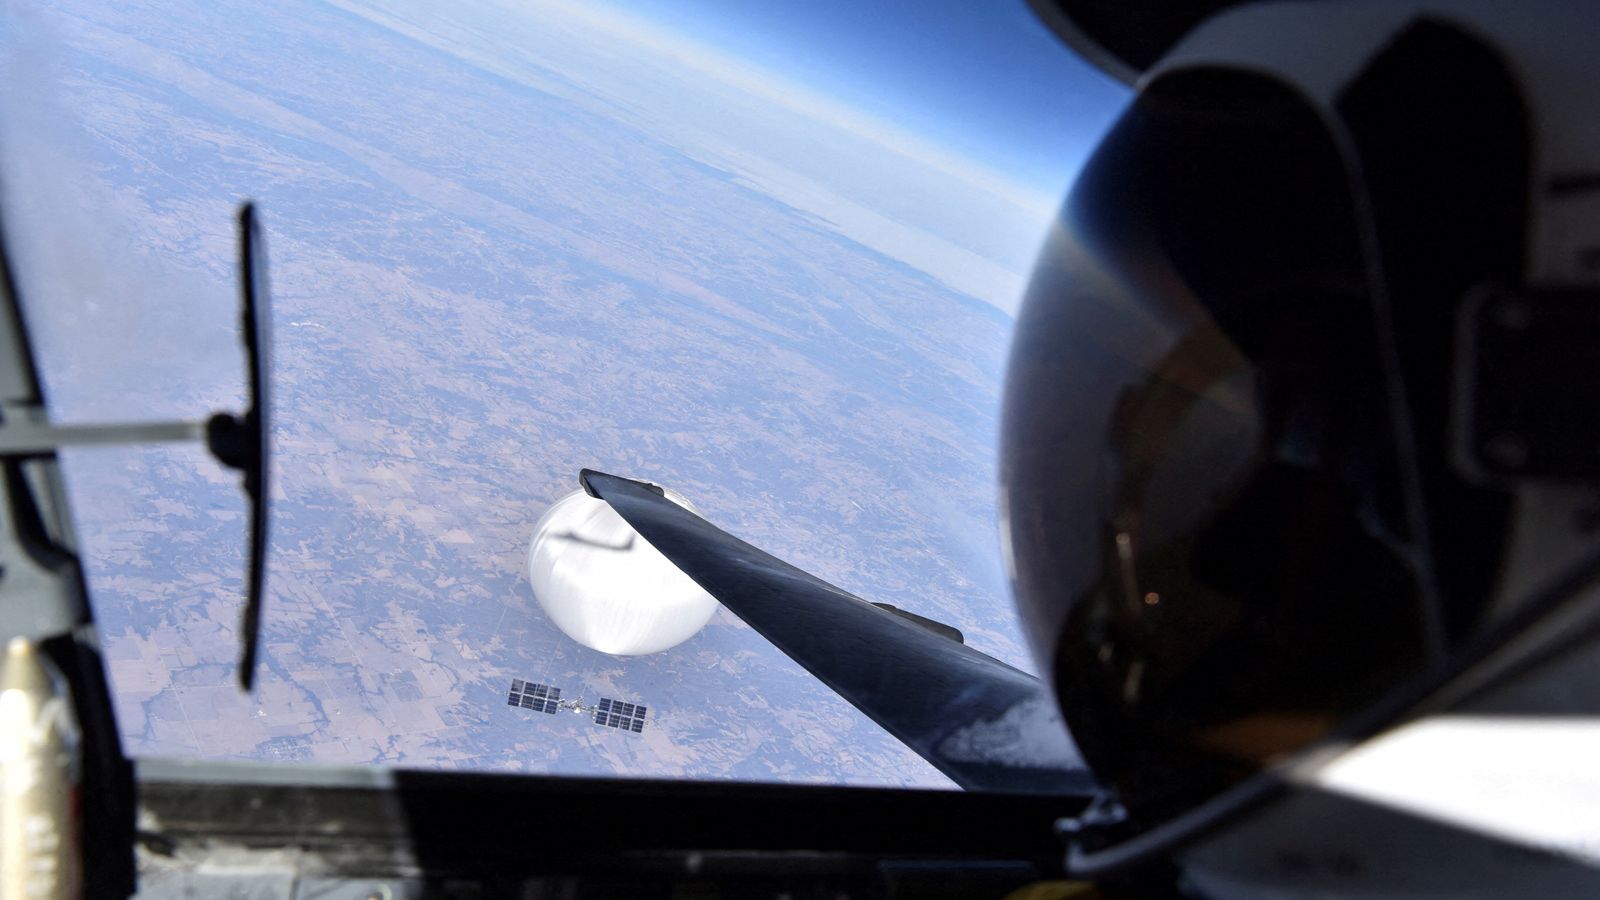 US releases photo of Chinese 'spy balloon' taken by pilot before it was shot down